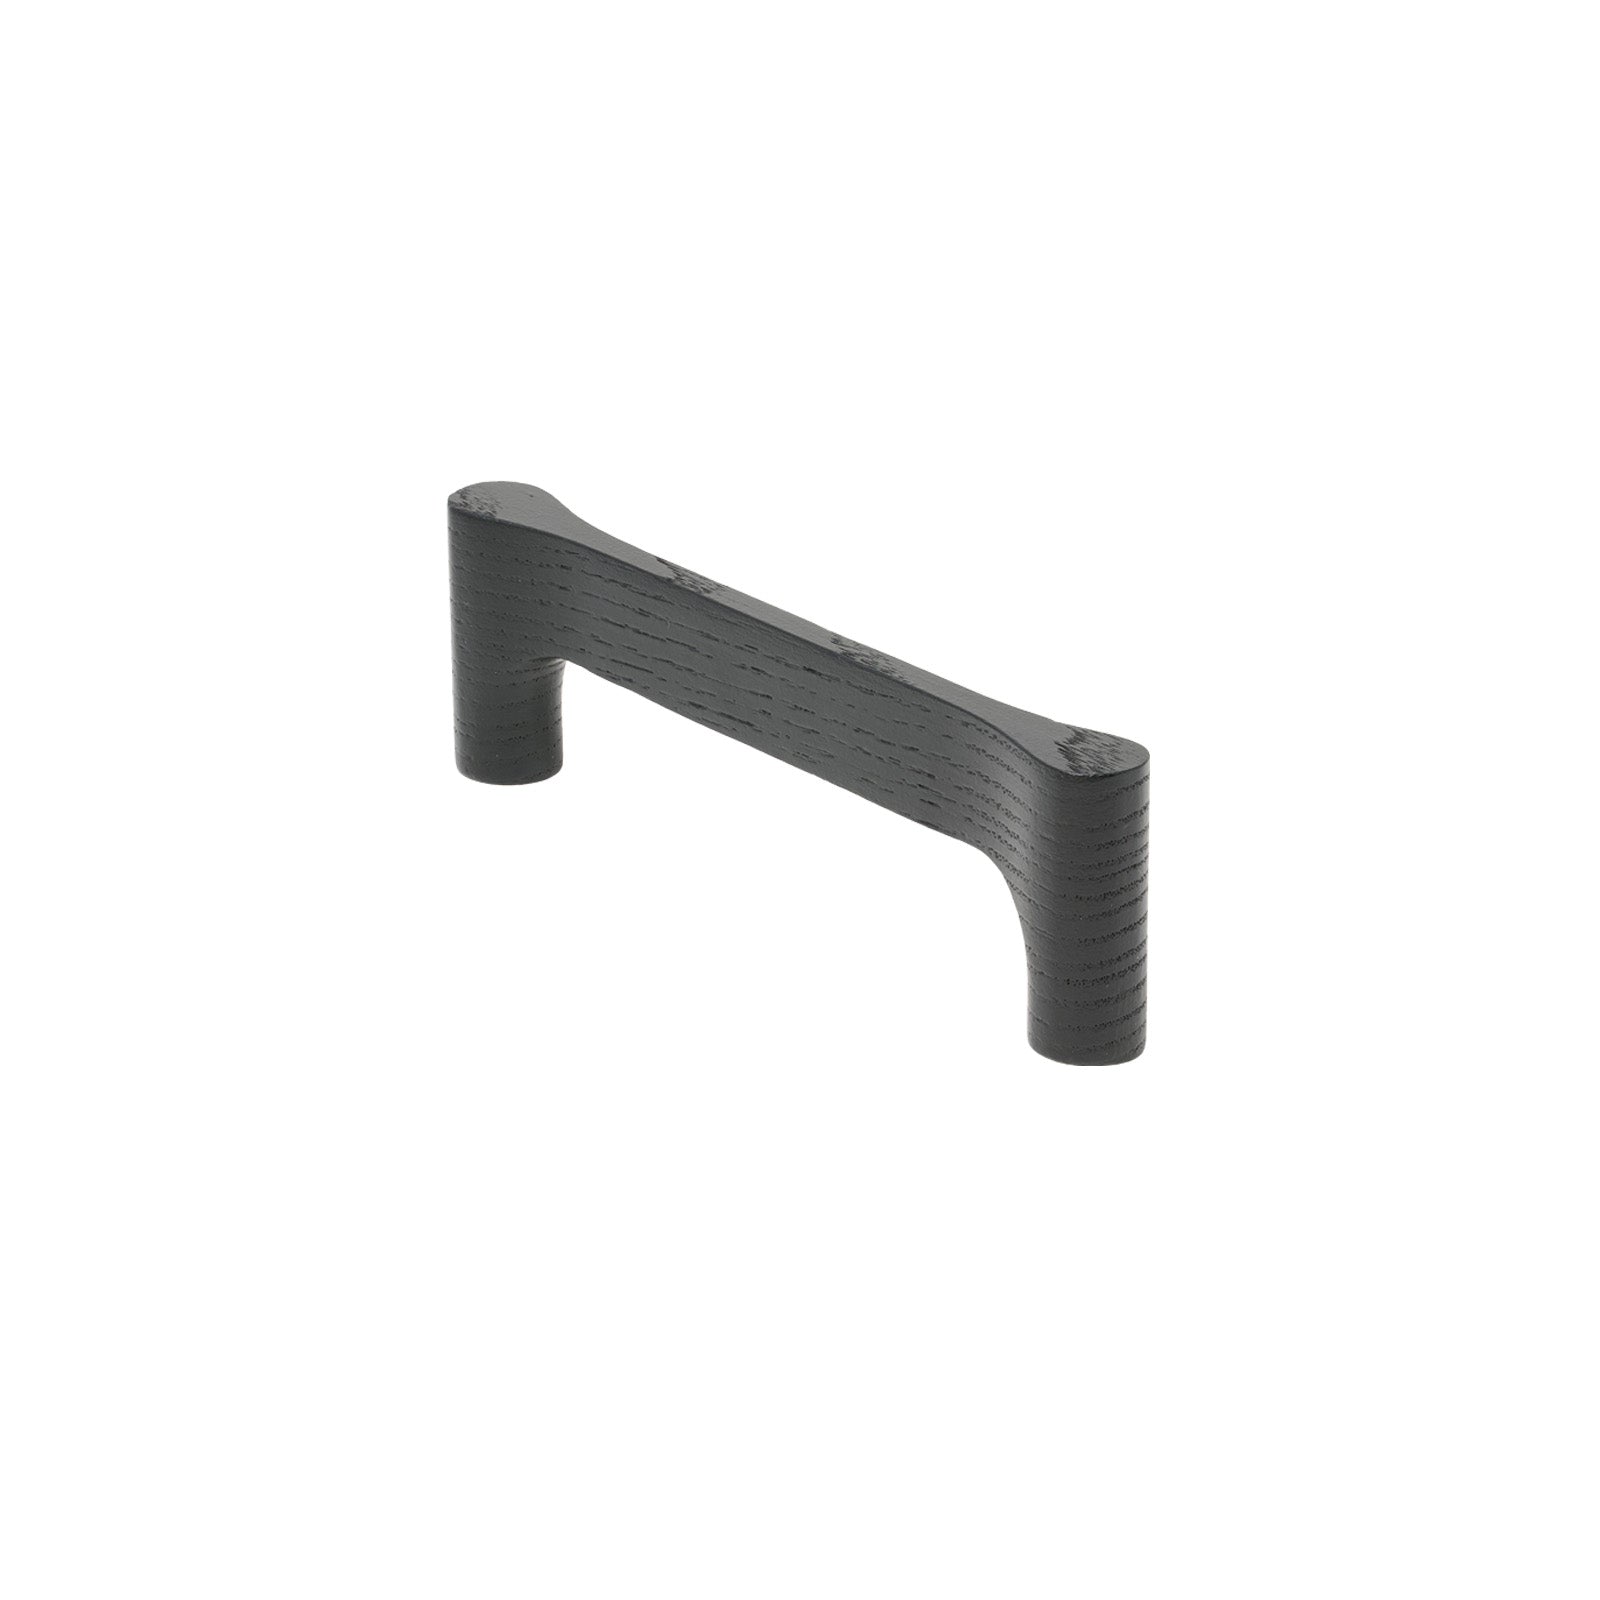 SHOW 128mm Gio Cabinet Pull Handle In Ash Finish